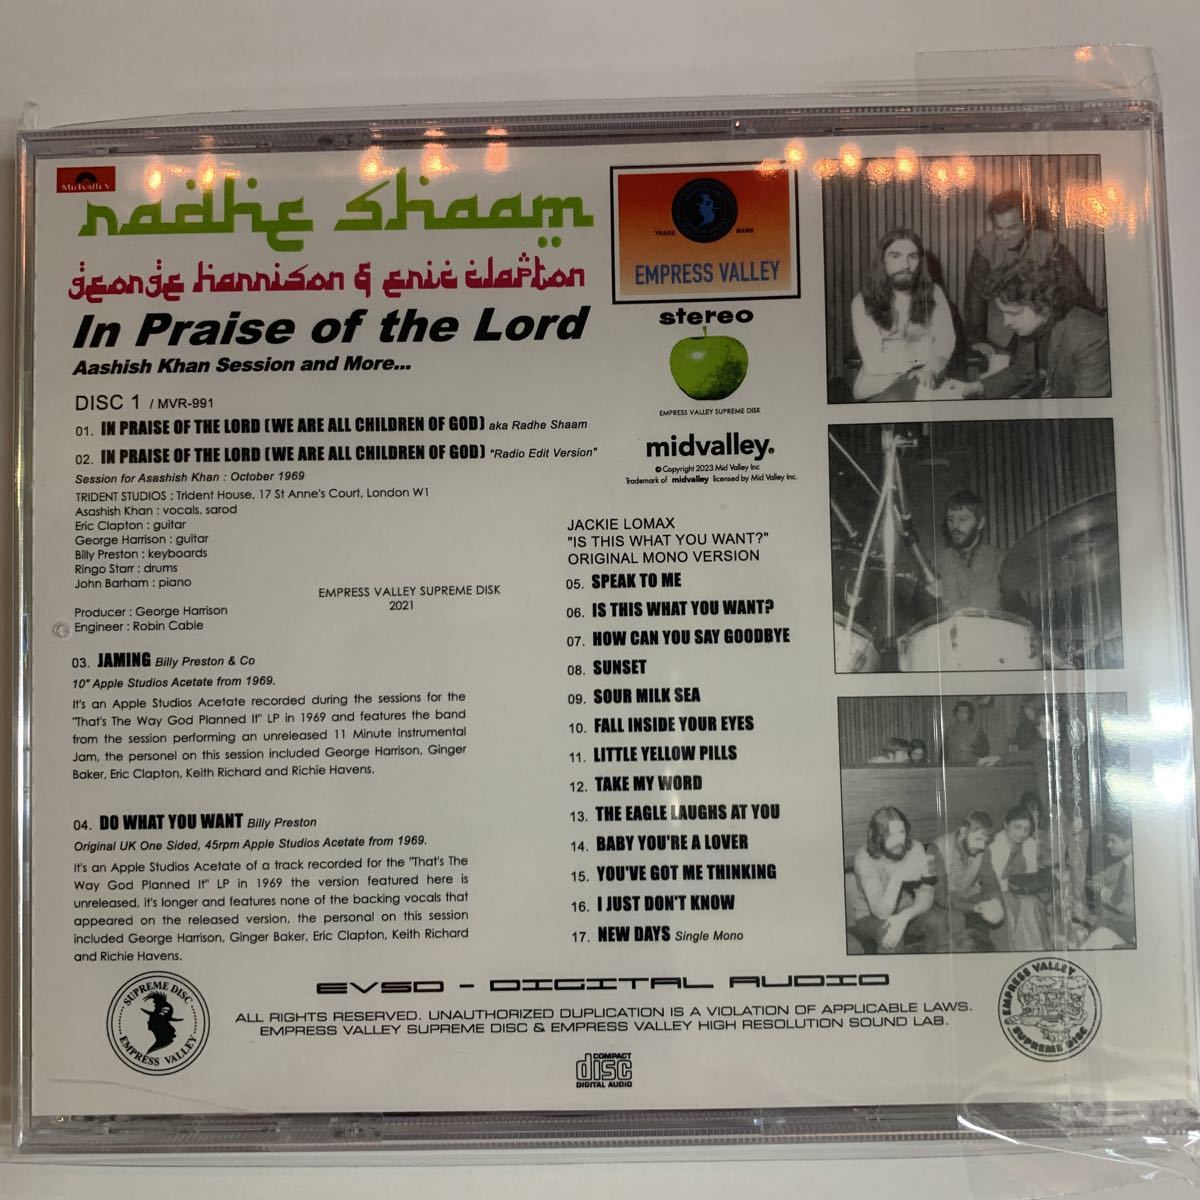 George Harrison Eric Clapton / “Radhe Shaam” Rare Trax and more (CD) Mid Valley Records プラケバージョンで再登場です！